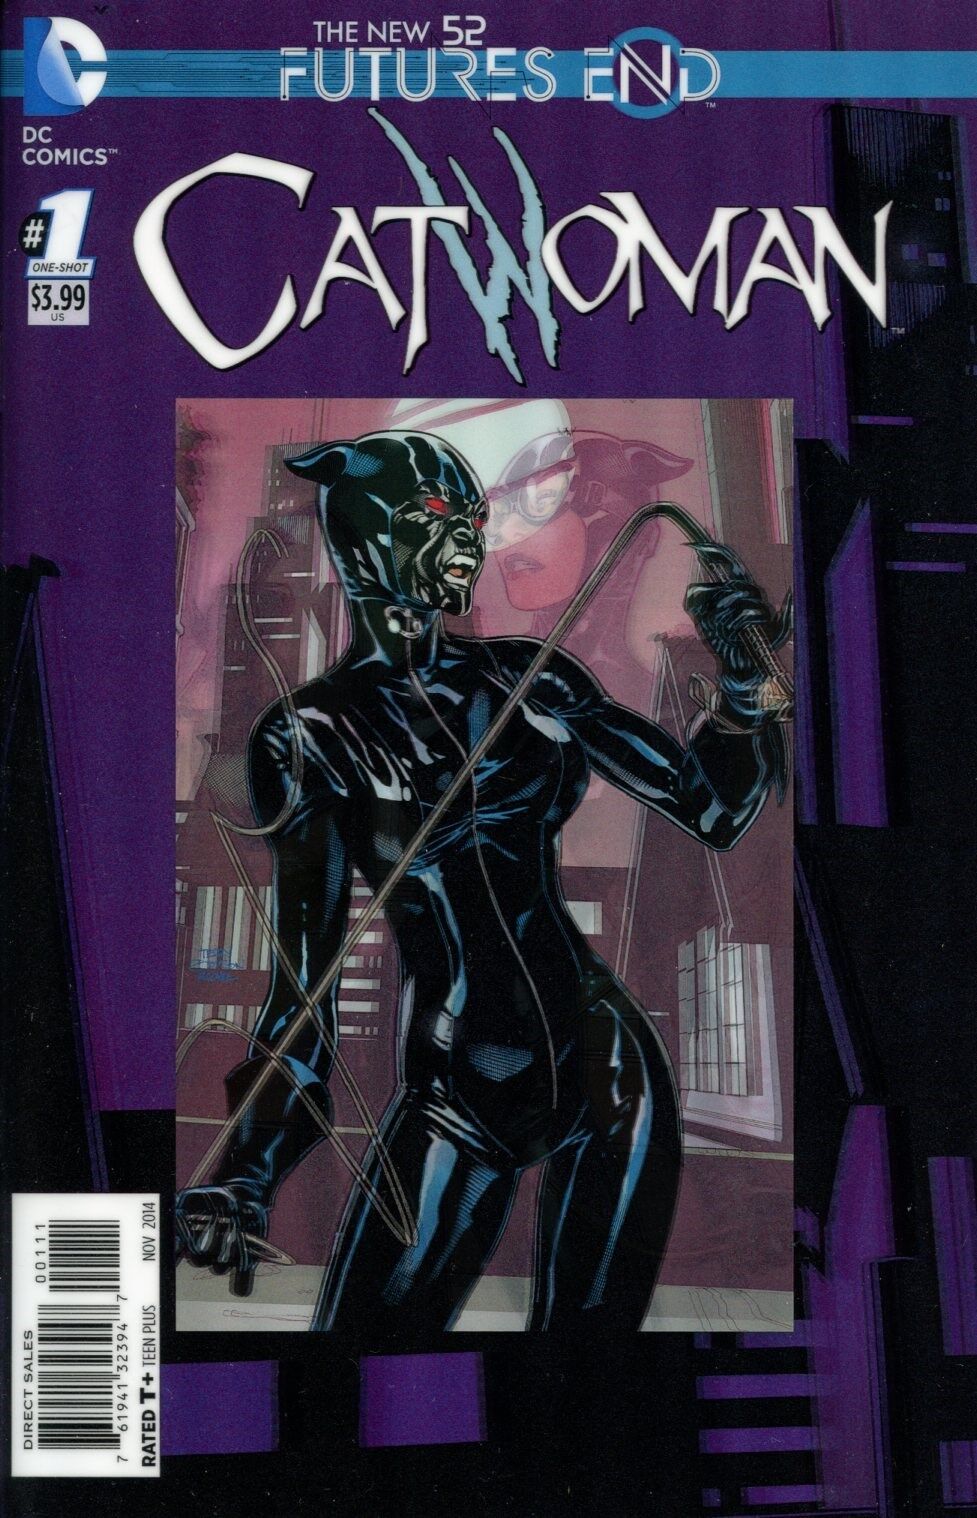 CATWOMAN # 1 FUTURES END 3D VARIANT COVER COMIC BOOK DC 2014